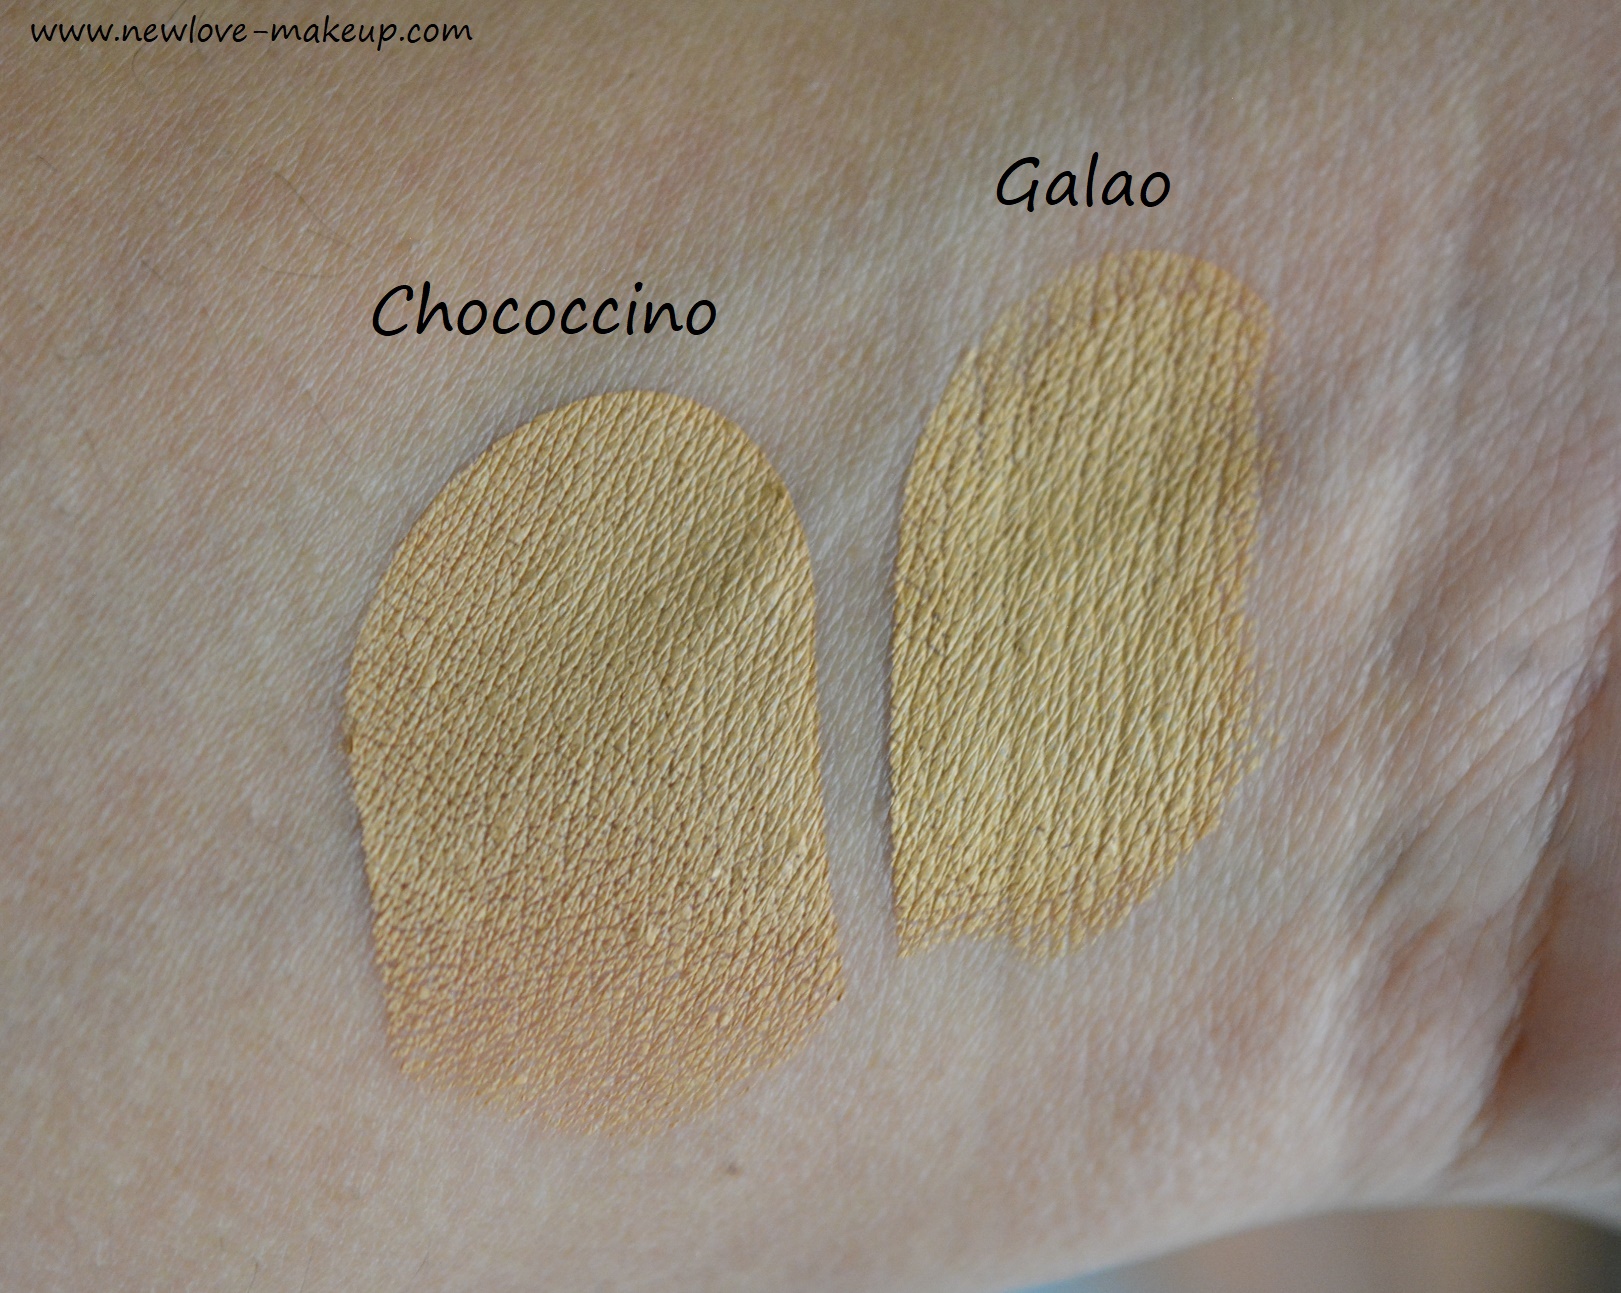 Sugar Ace of Face Foundation Sticks Review, Swatches, Demo, Wear Test